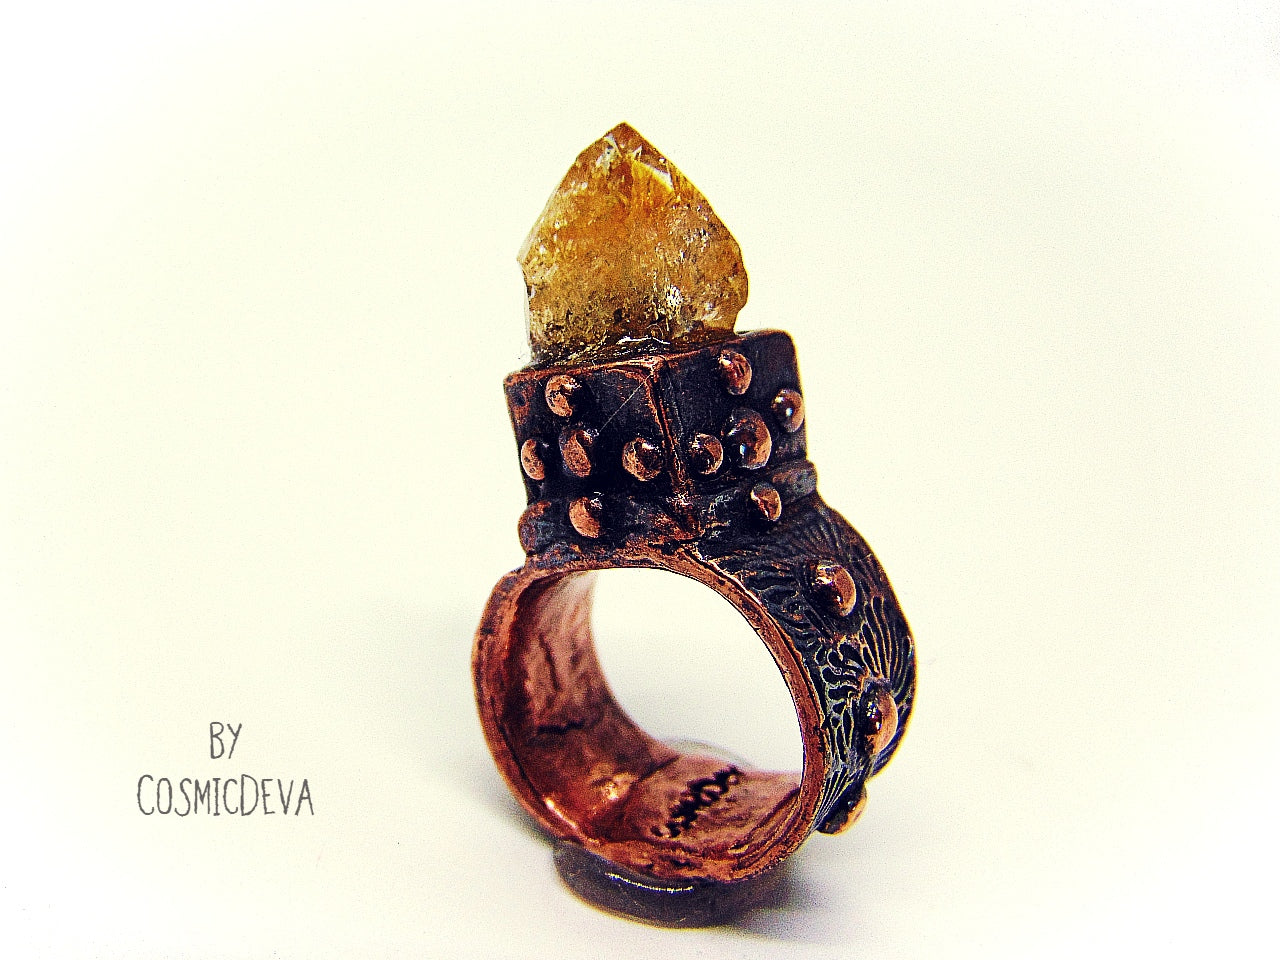 Raw Citrine Crystal Point Medieval Copper Ring, US Size 6.5 Ring. This unique medieval handmade and kiln fired ring is made of pure copper with a golden raw citrine crystal point. This rough Citrine gemstone is a November birthstone. Comes in a beautiful gift box. Treat yourself or a loved one! - CosmicDeva